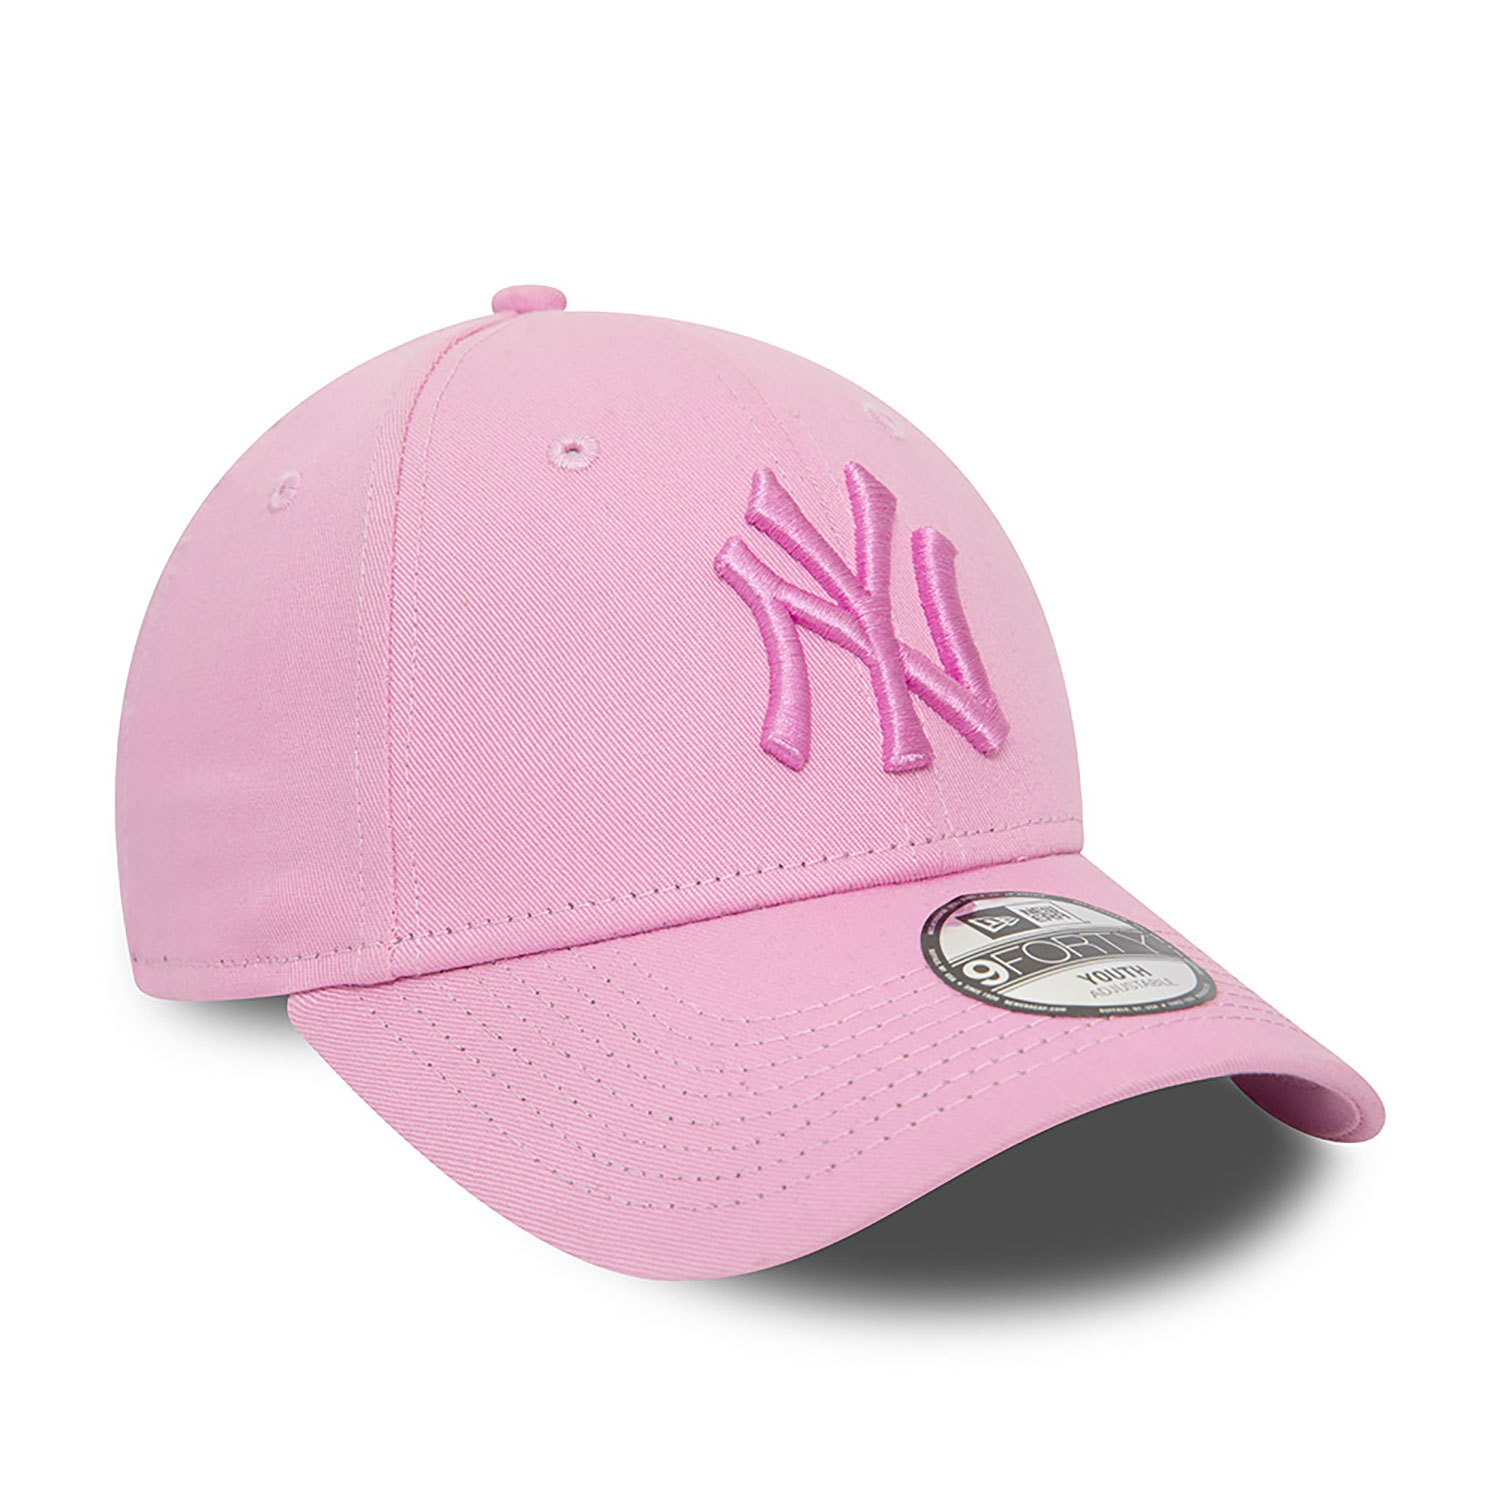 New York Yankees Youth League Essential Pink 9FORTY Adjustable Cap